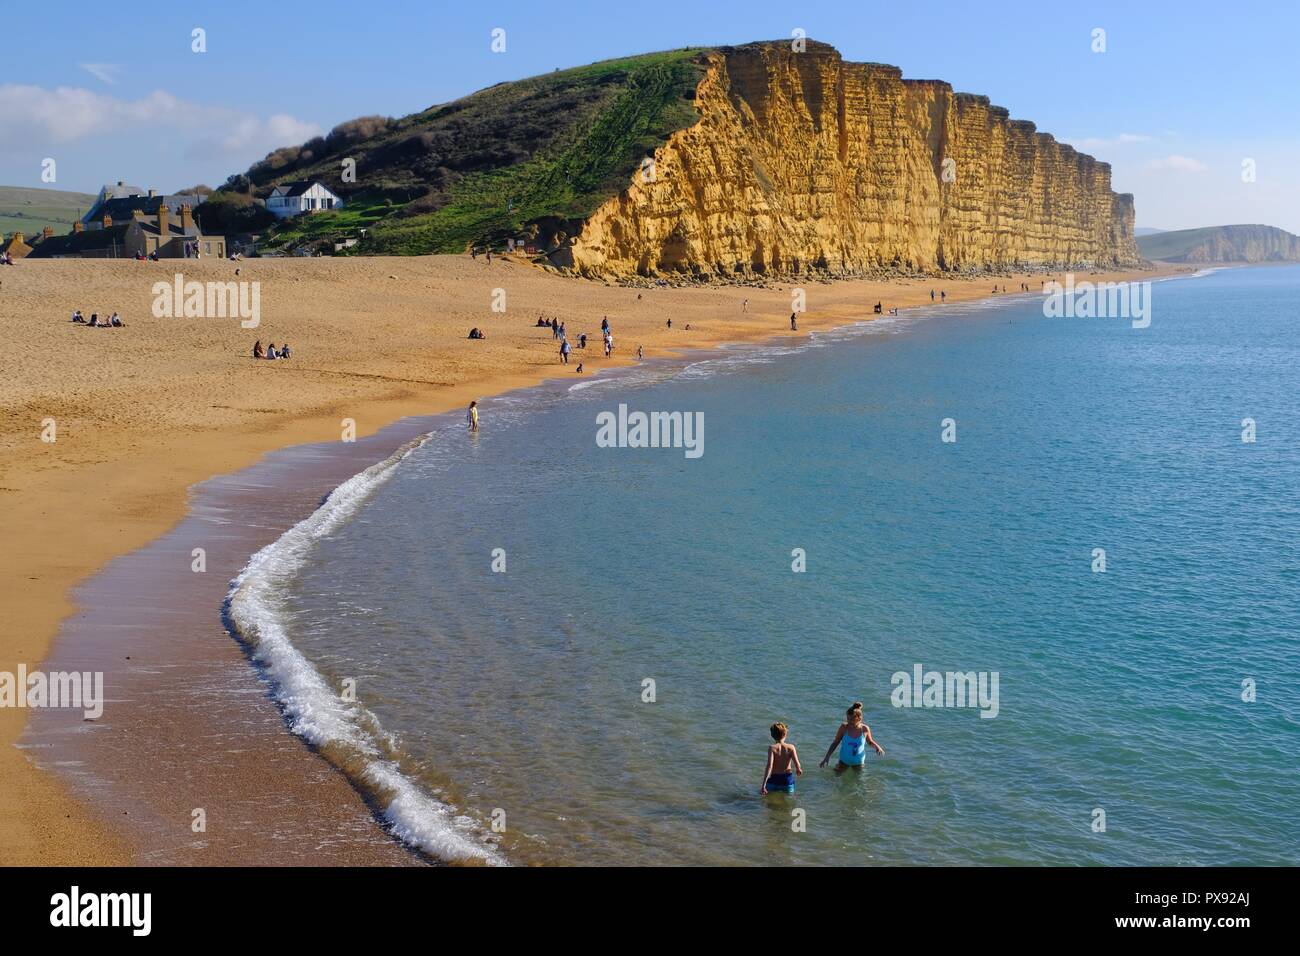 West Bay, Dorset, UK - 20 October 2018 Visitors to West Bay on the Dorset coast enjoy what promises to be the last of the sunshine before the cold weather sets in. Credit: Tom Corban/Alamy Live News Stock Photo